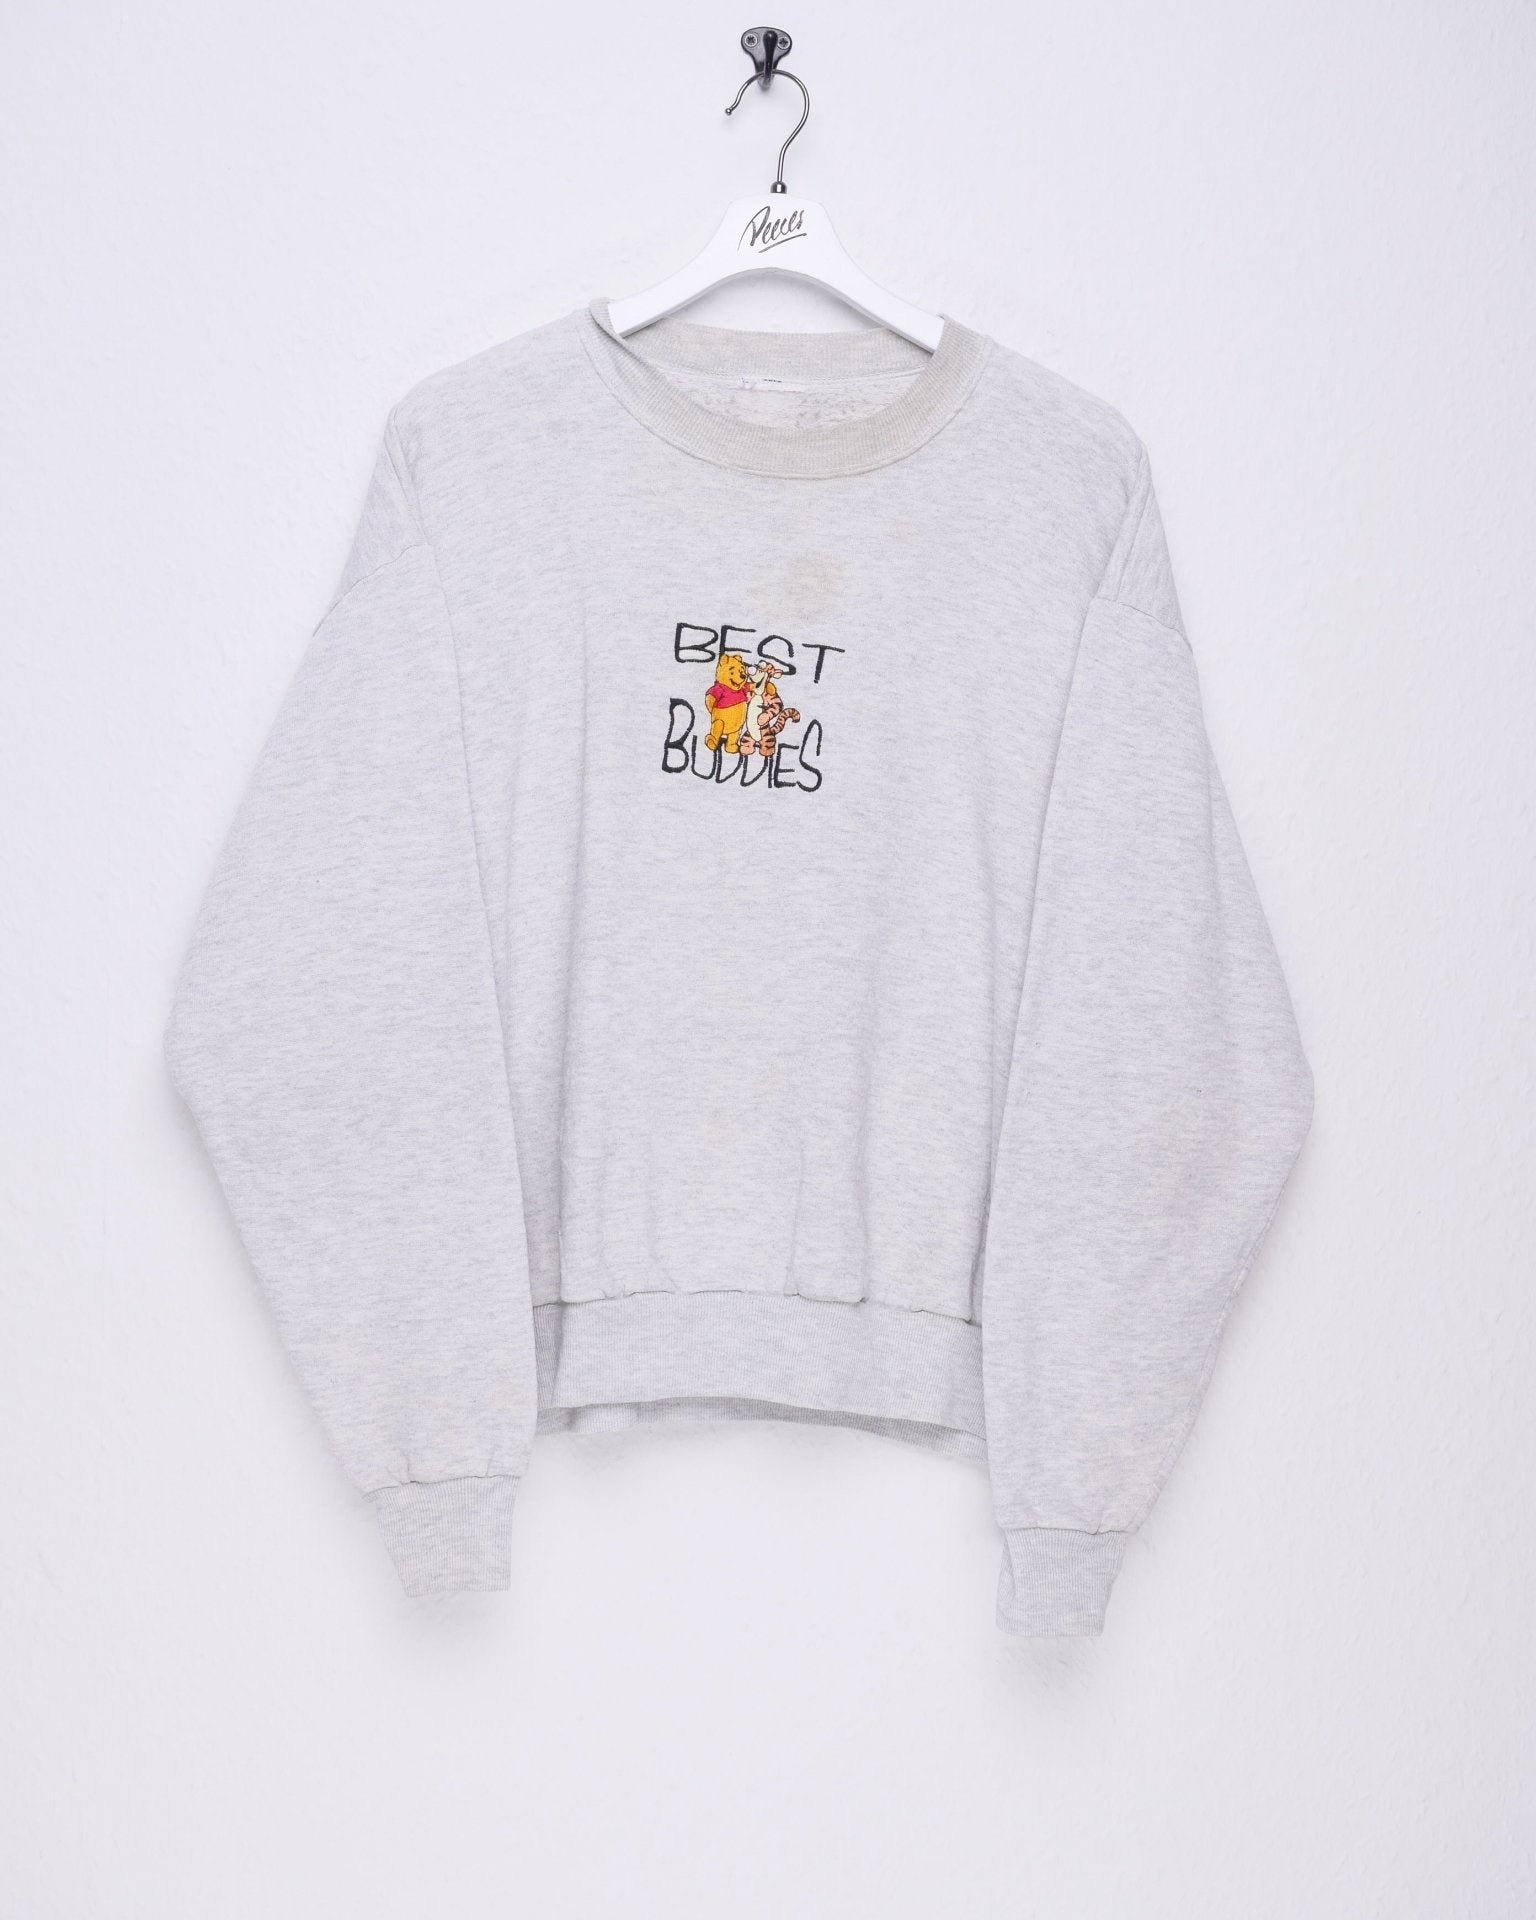 disney 'Best Buddies' embroidered Graphic grey Sweater - Peeces